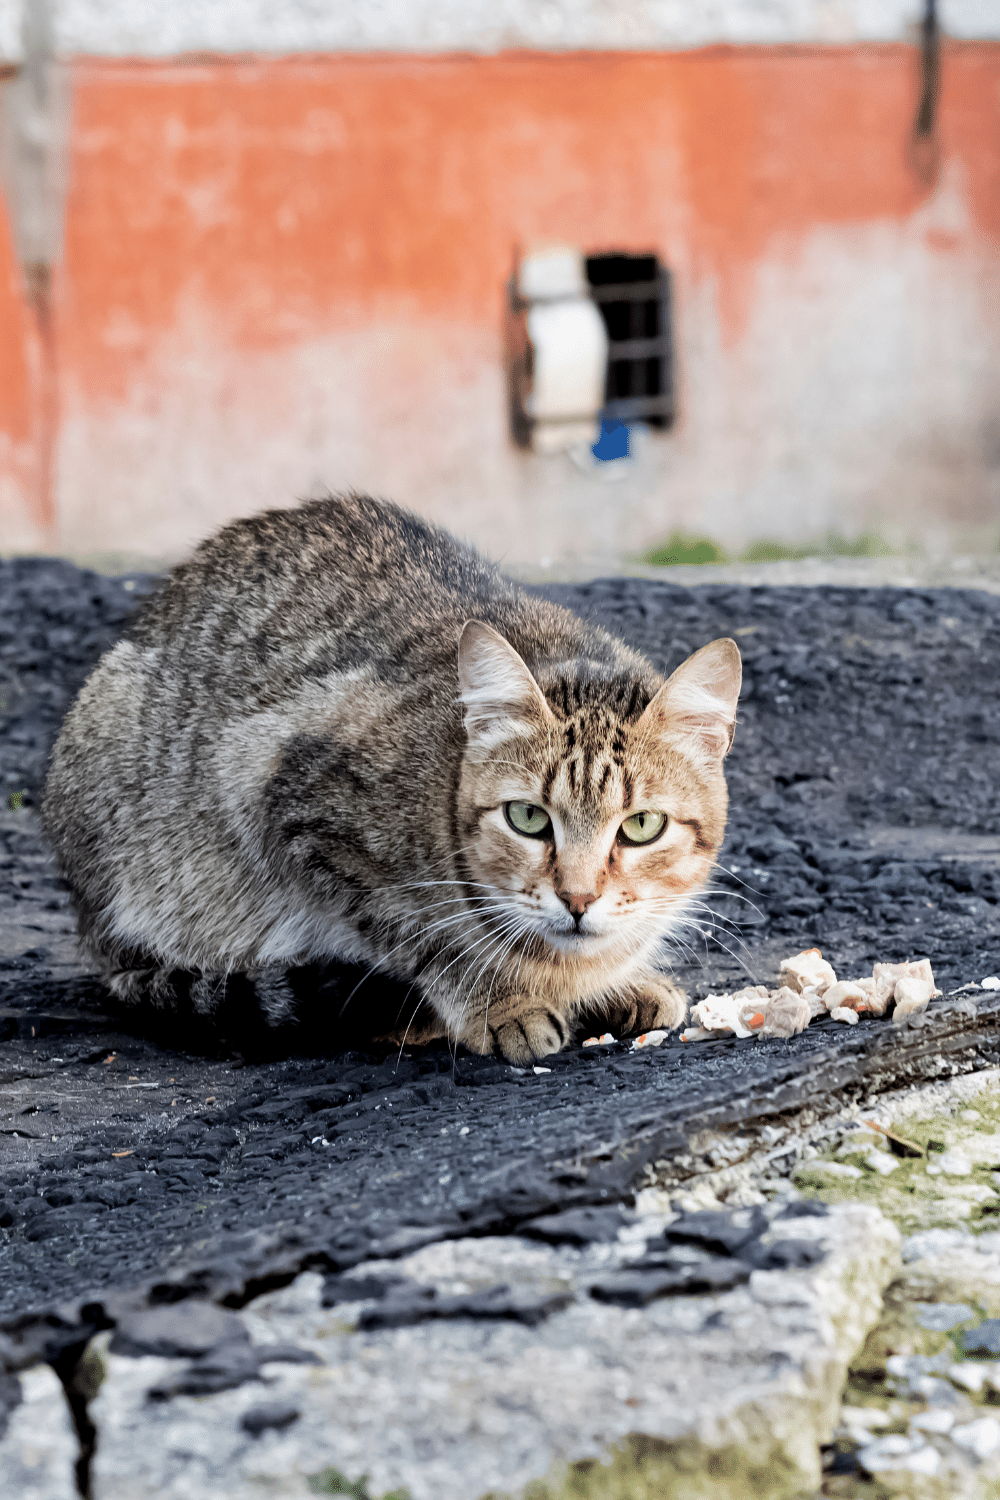 Stray Cats Depend on Kind Humans